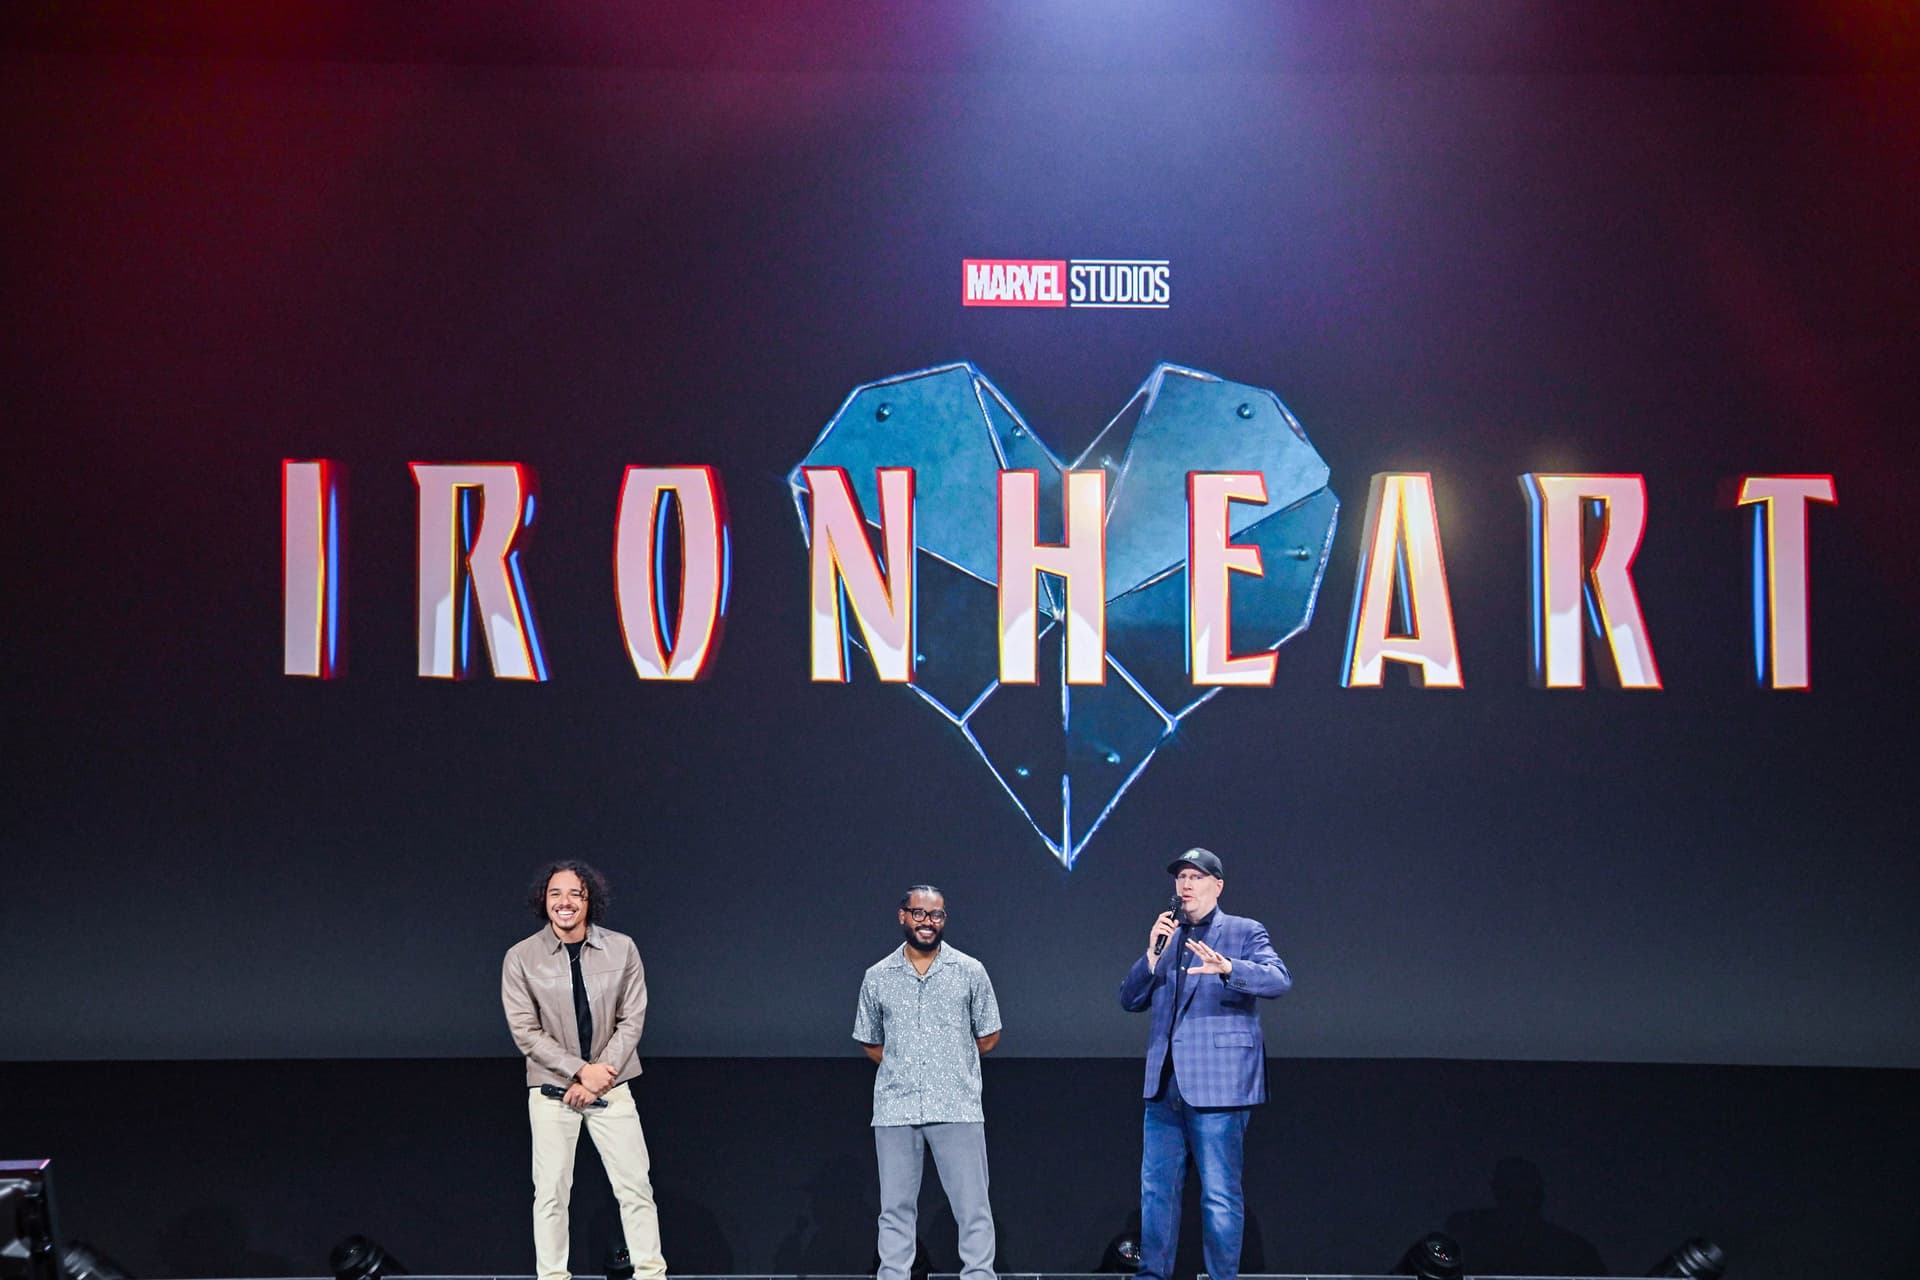 Anthony Ramos, Ryan Coogler, and Kevin Feige at the 'Ironheart' panel during D23